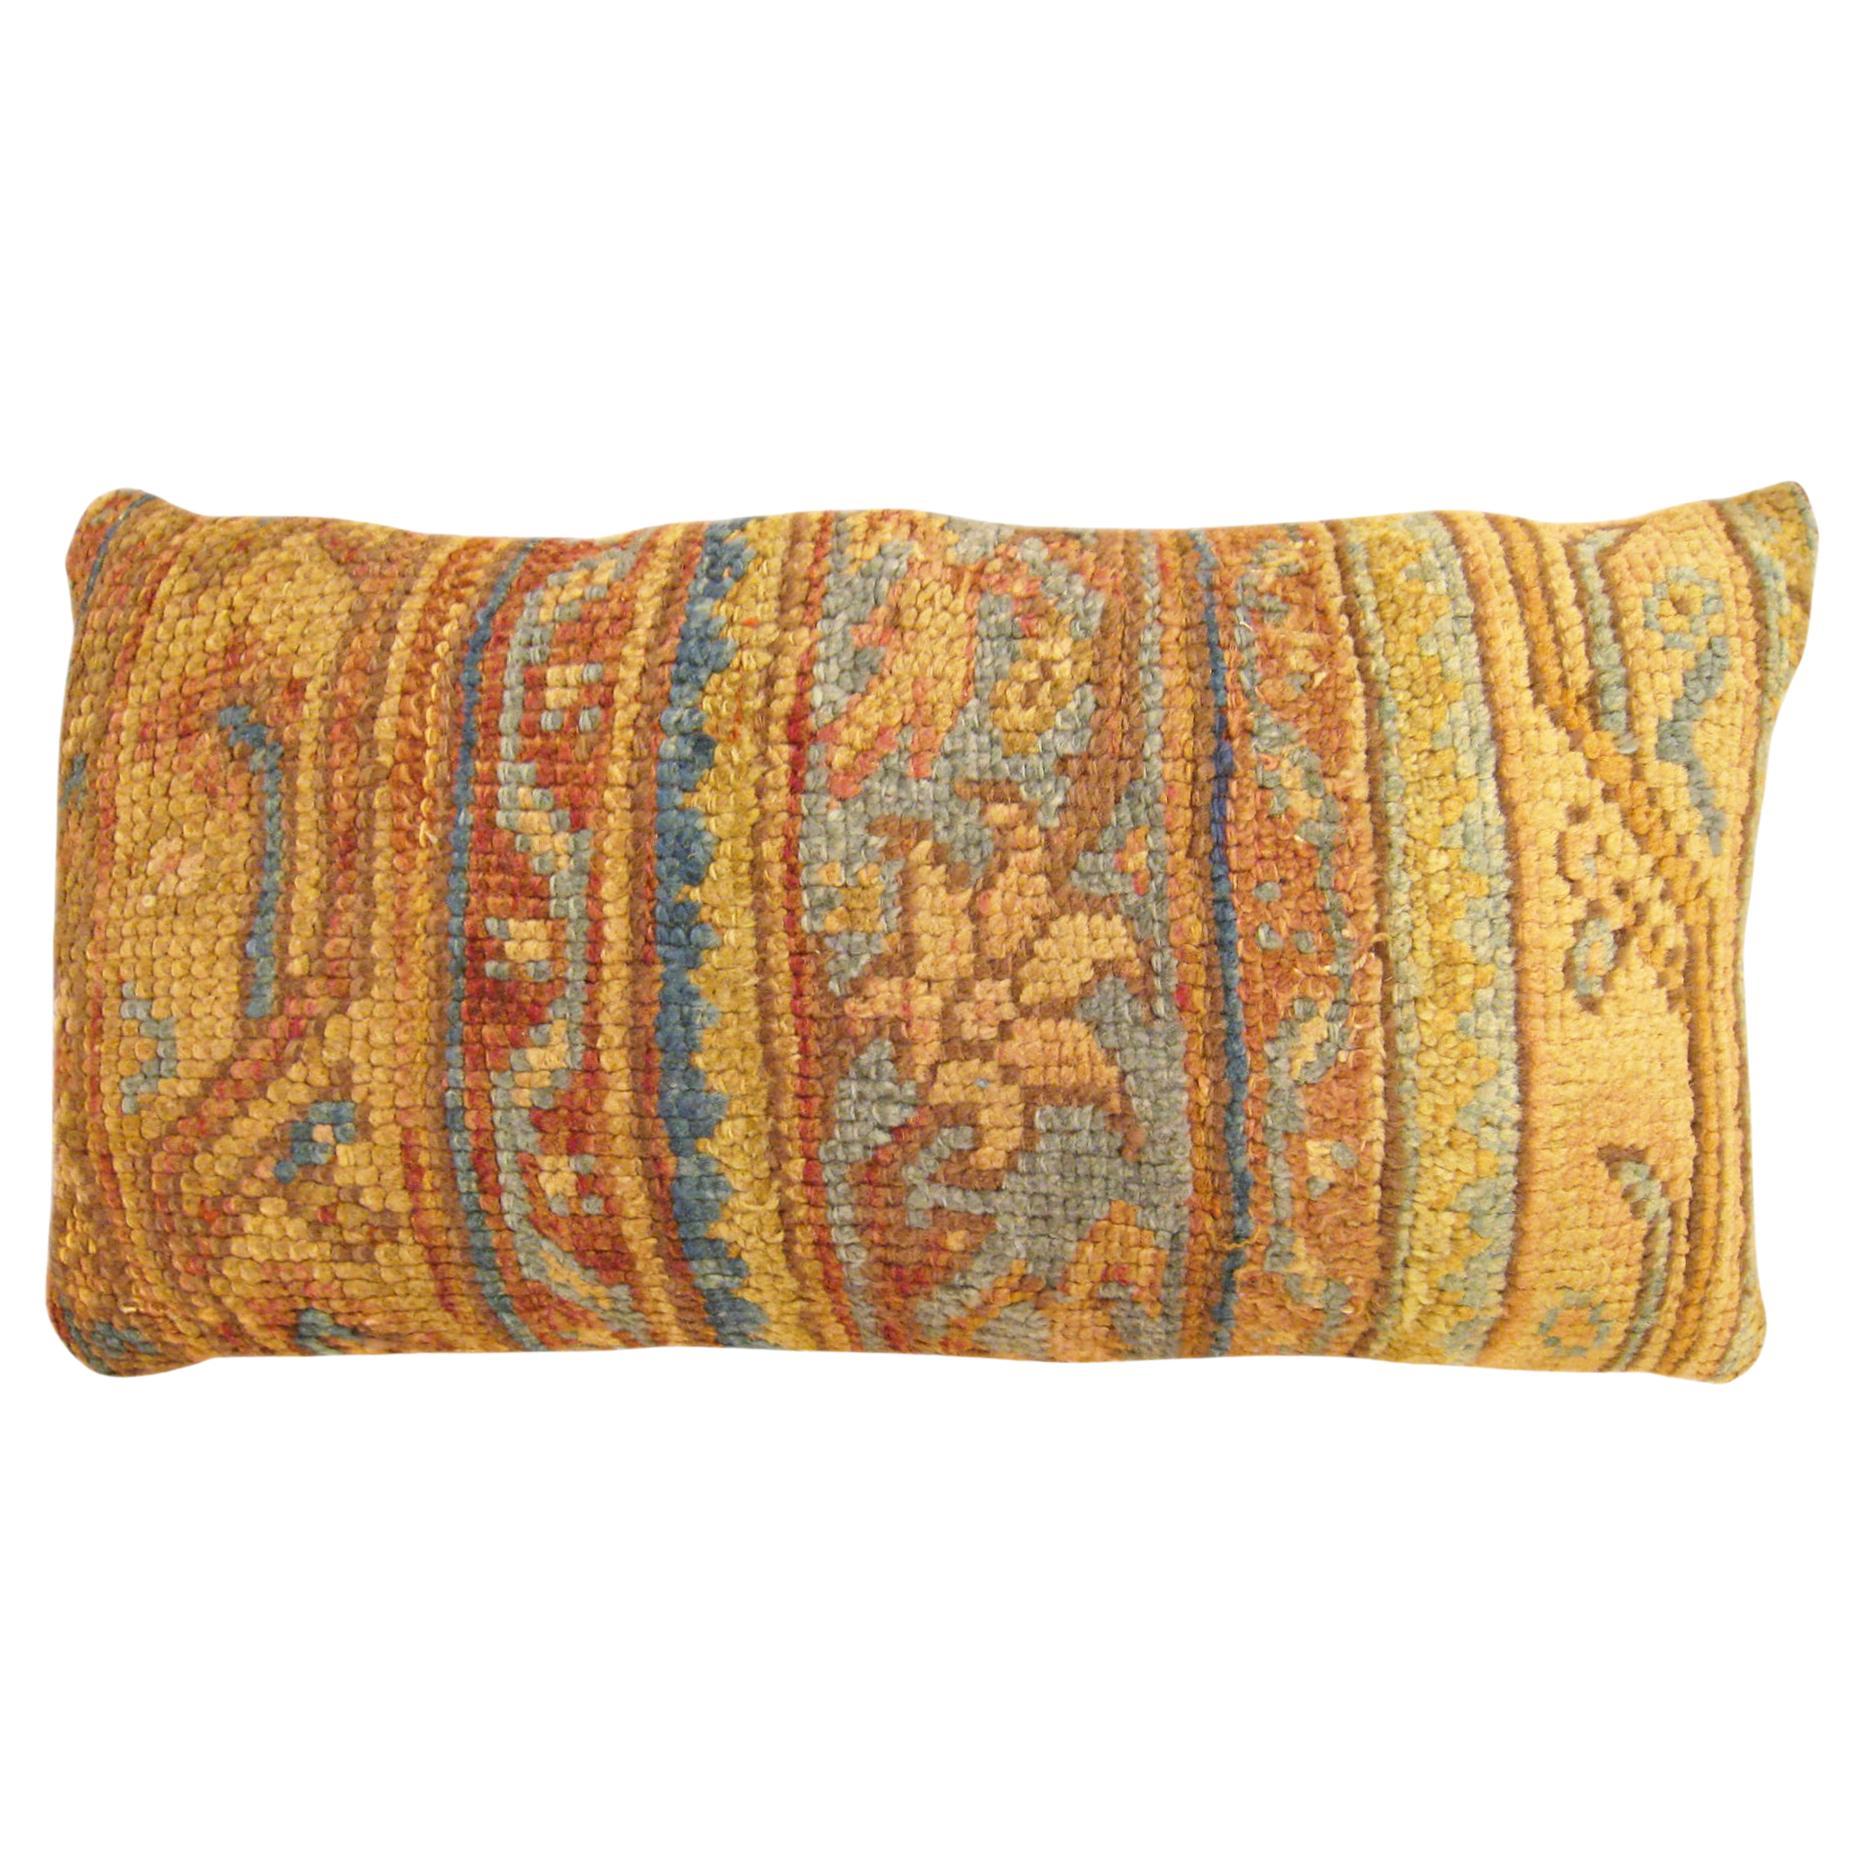  Decorative Antique Turkish Oushak Rug Pillow with Geometric Abstracts Motif For Sale